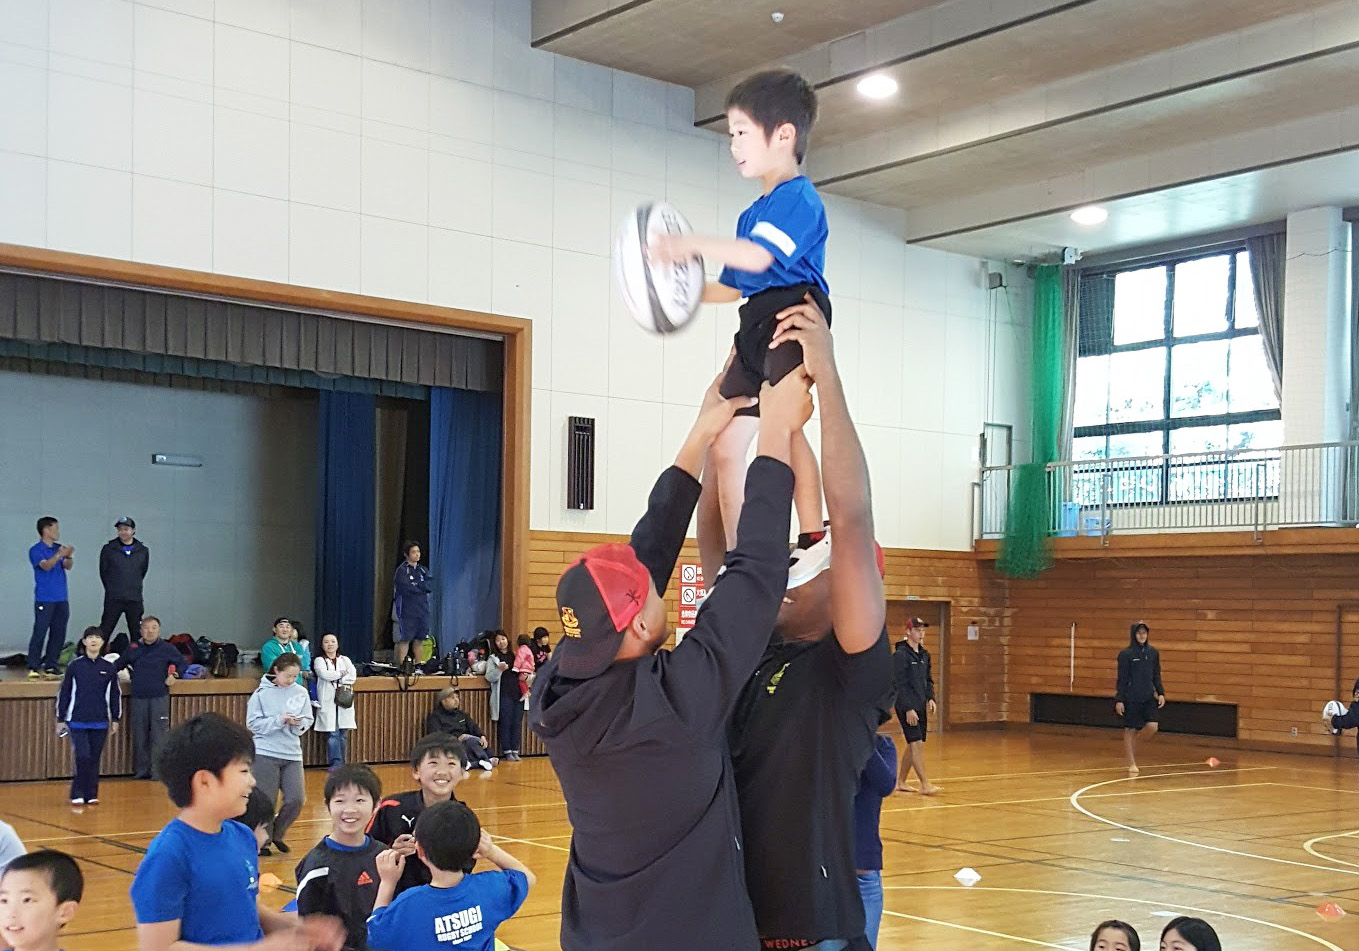 Two Hamilton Boys Rugby players lift a young boy into the air to catch a rugby ball